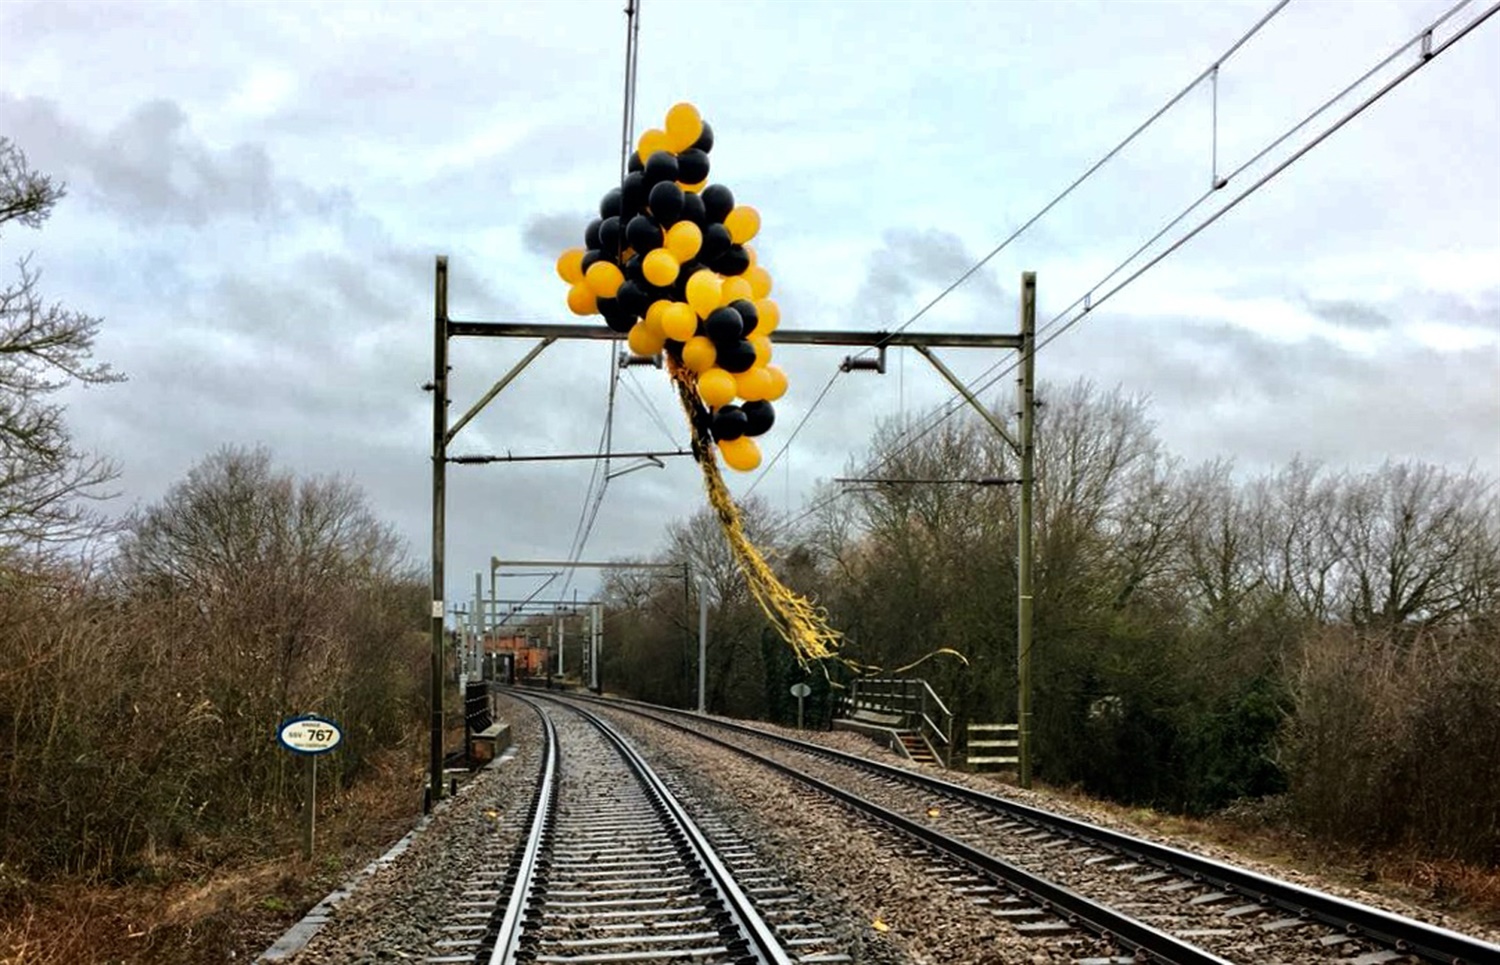 Helium balloons causing ‘increasing number of train delays’ at cost of £1m